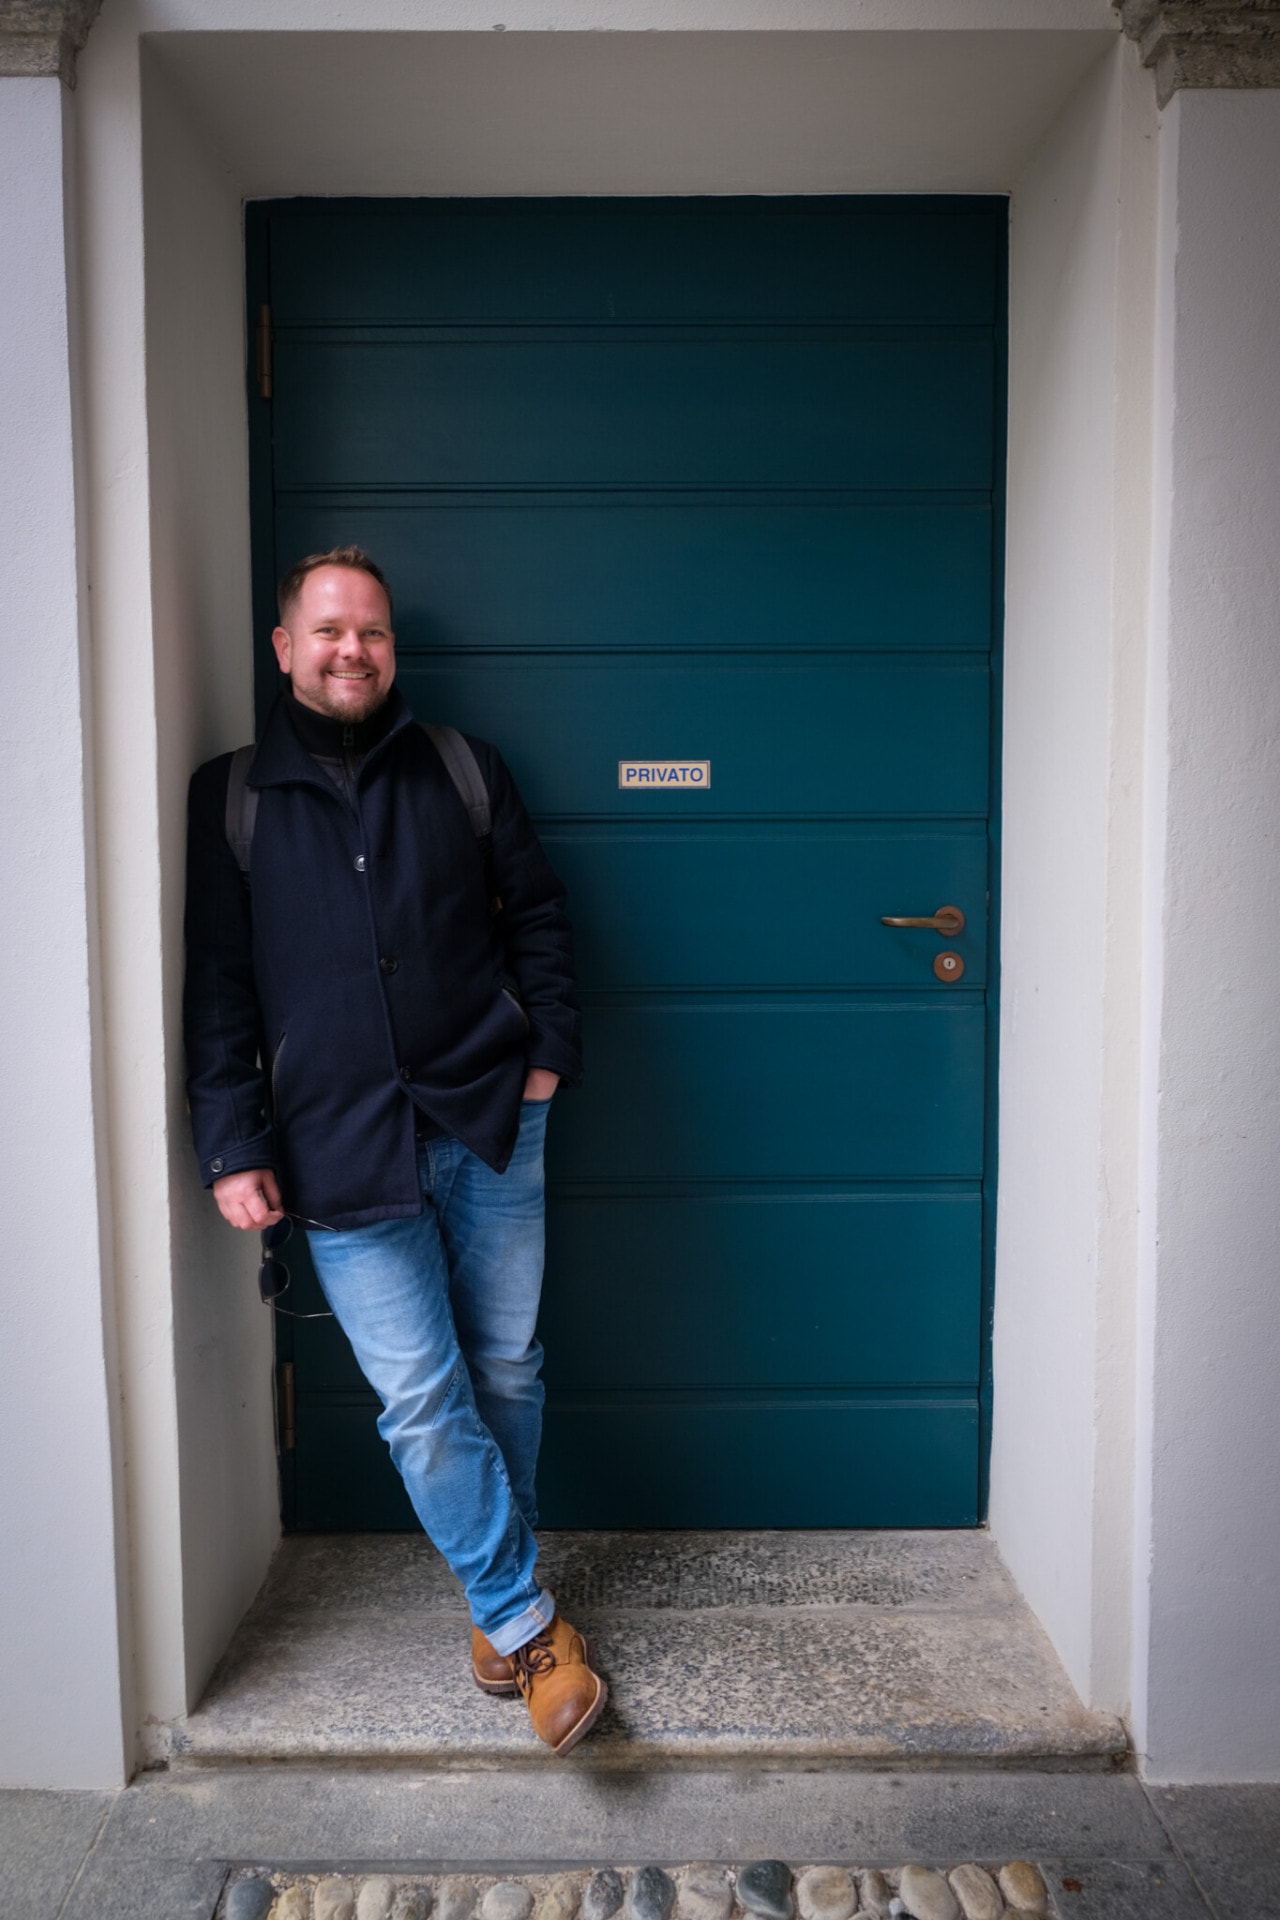 Velthy leaning against a large turquoise door